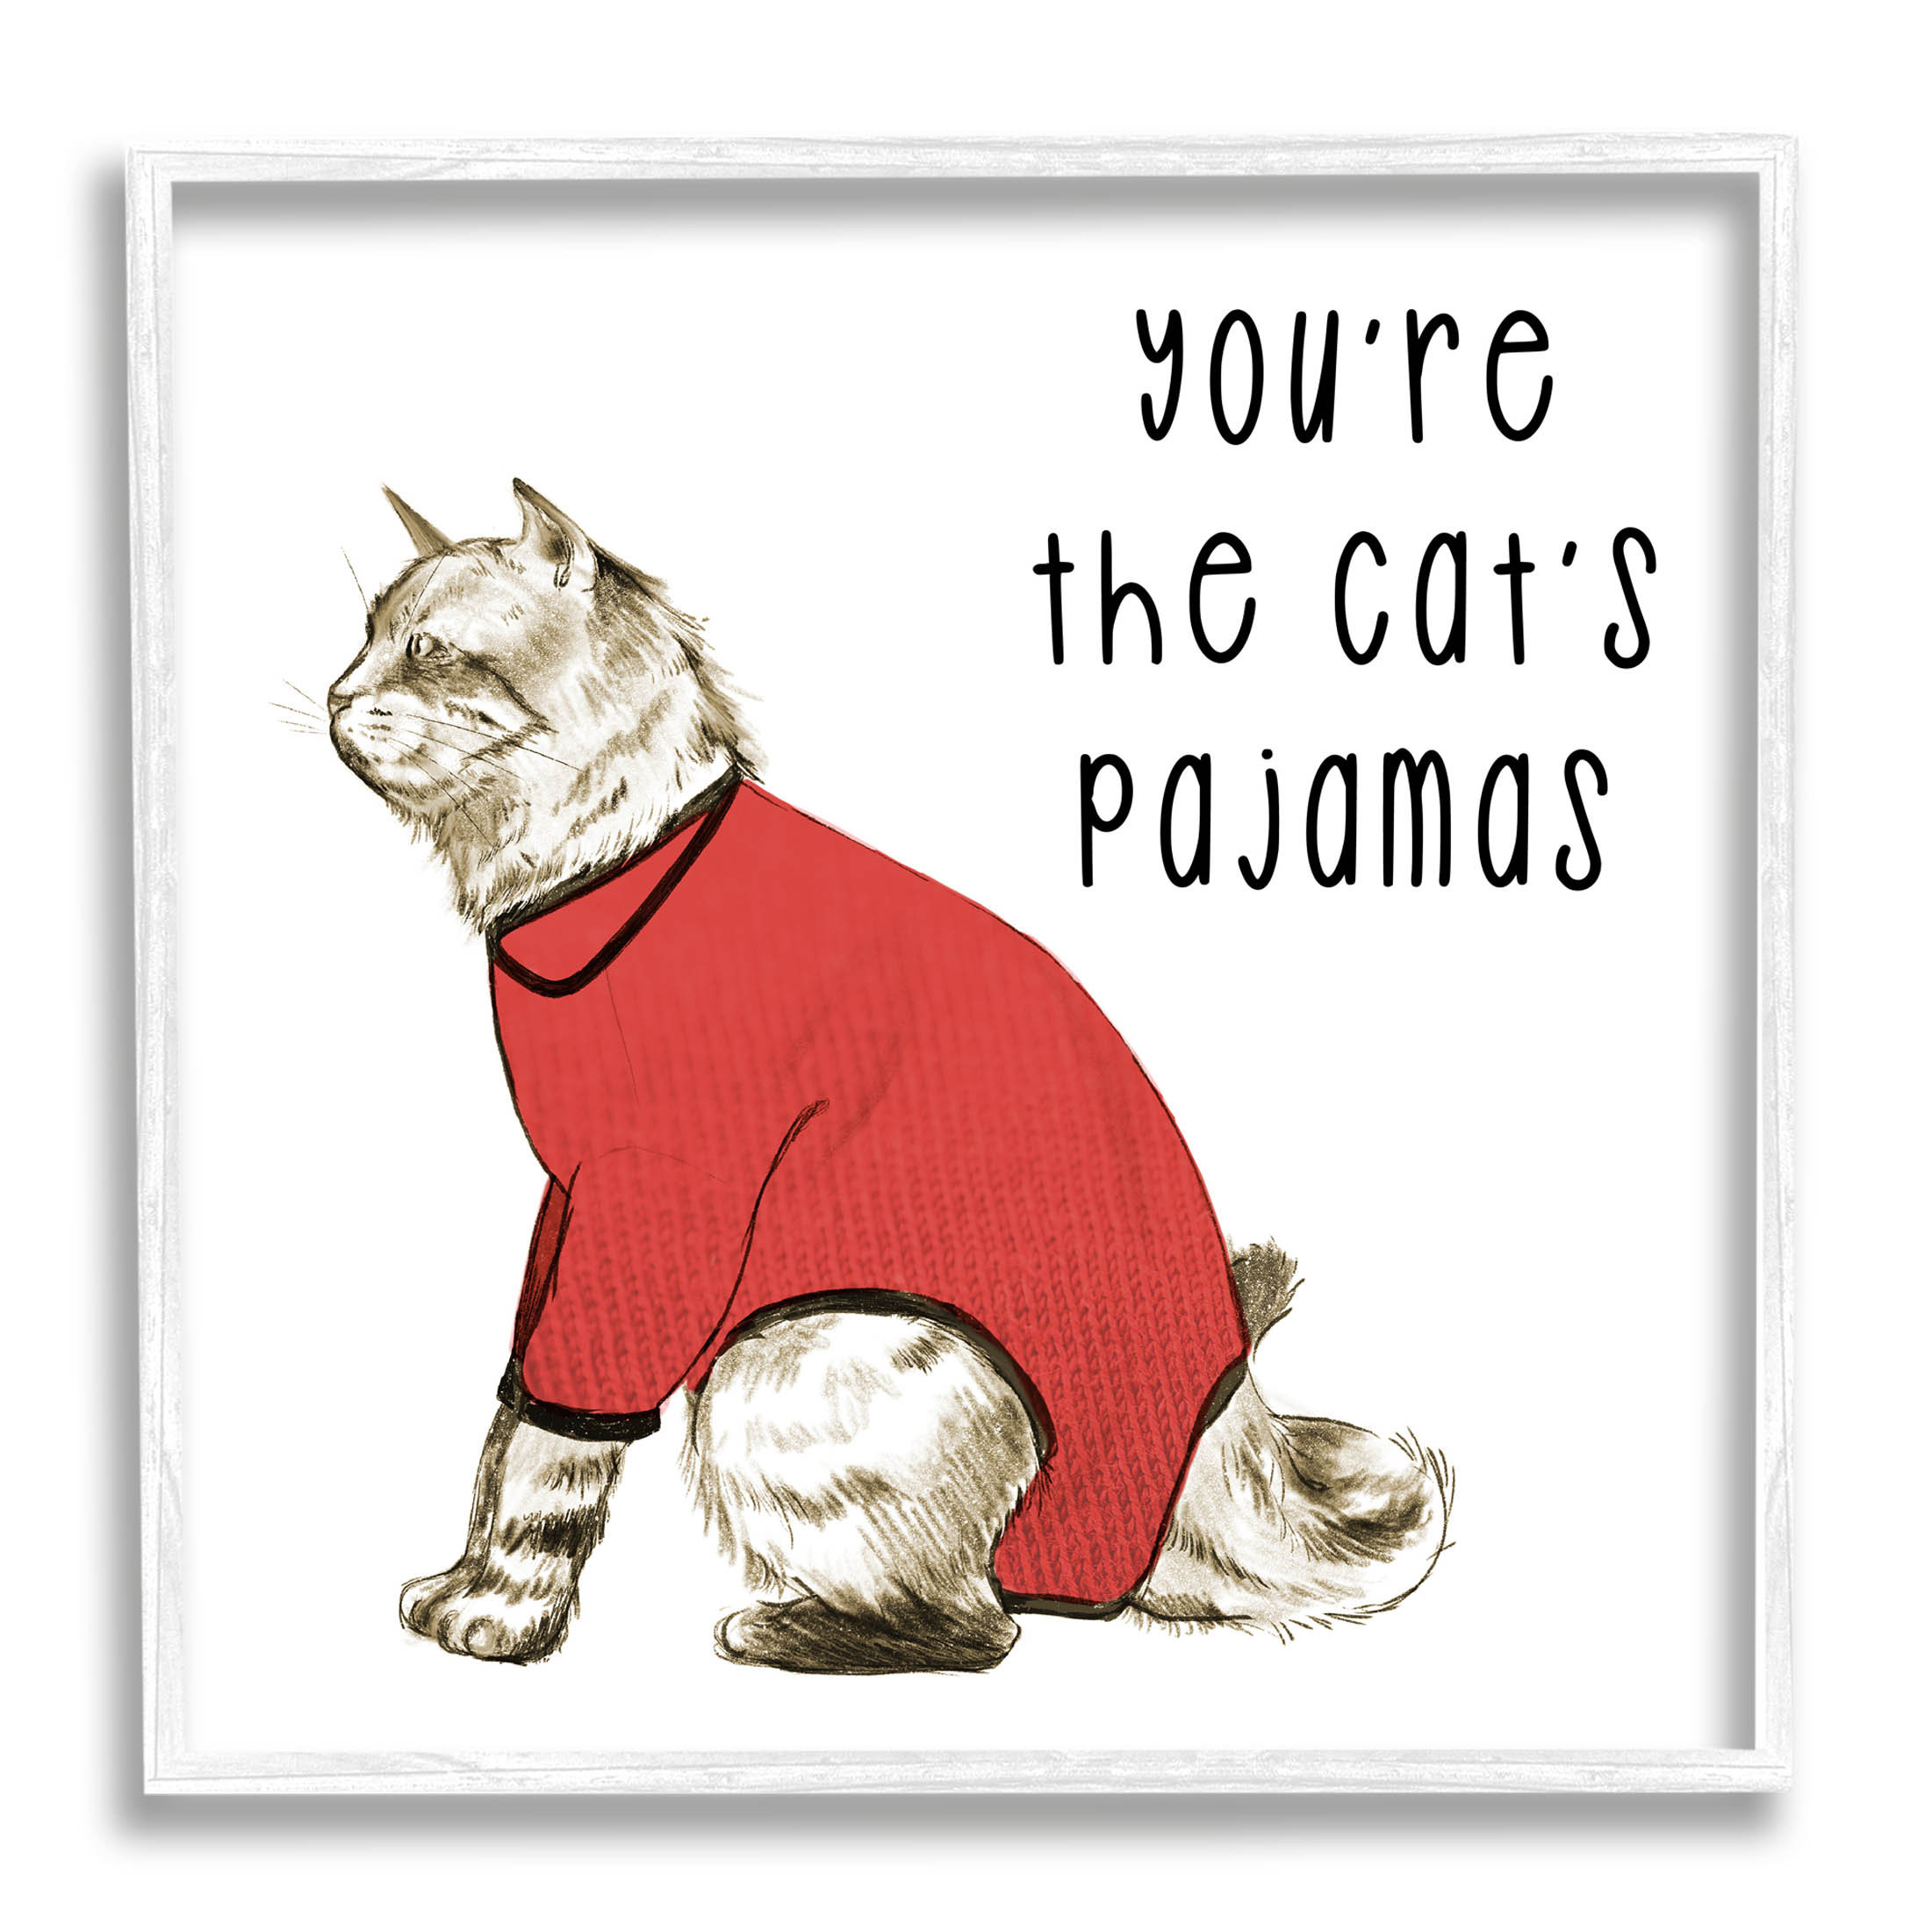 The Cat's Pajamas Funny Pet Framed On Wood by Lil' Rue Print